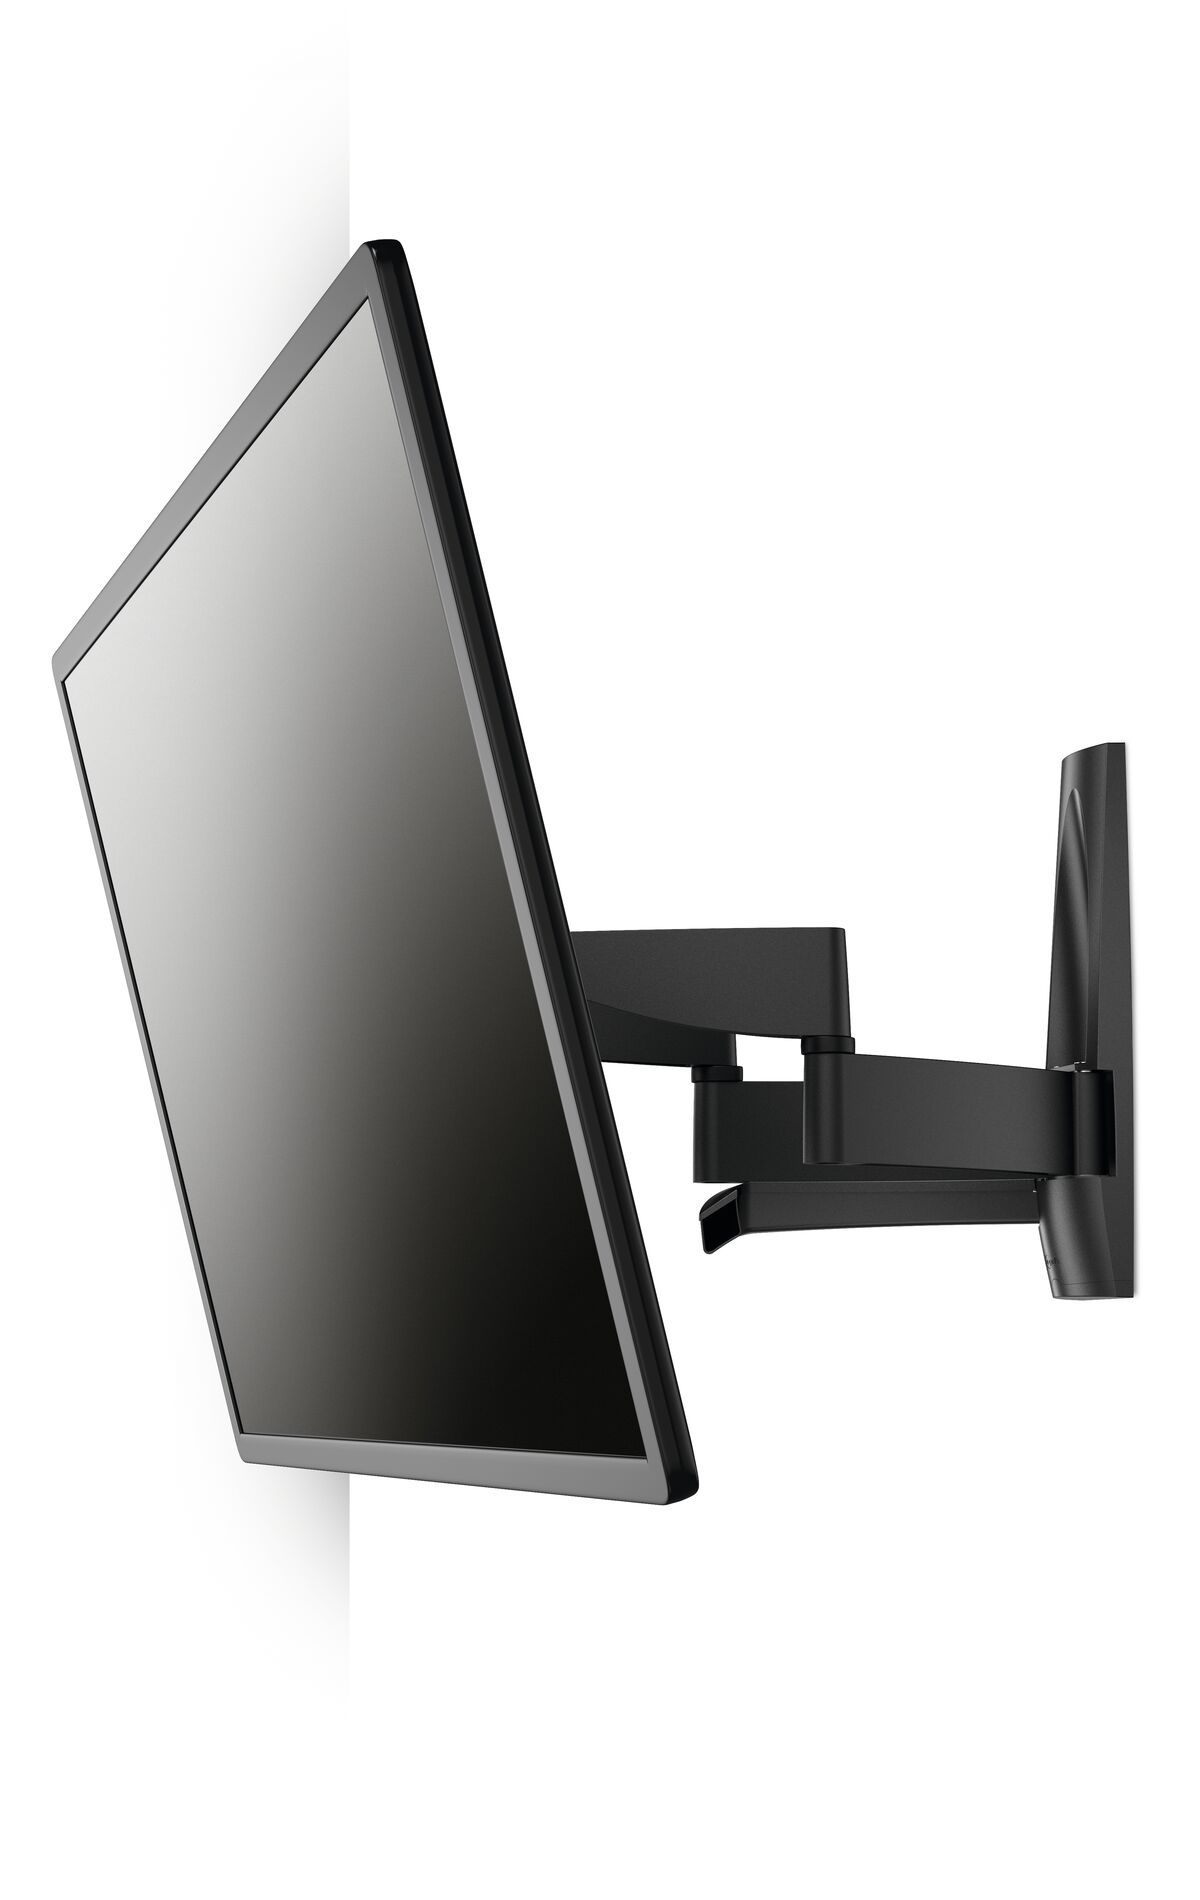 Vogel's WALL 2350 Full-Motion TV Wall Mount - Suitable for 40 up to 65 inch TVs - Motion (up to 120°) - Tilt up to 15° - White wall